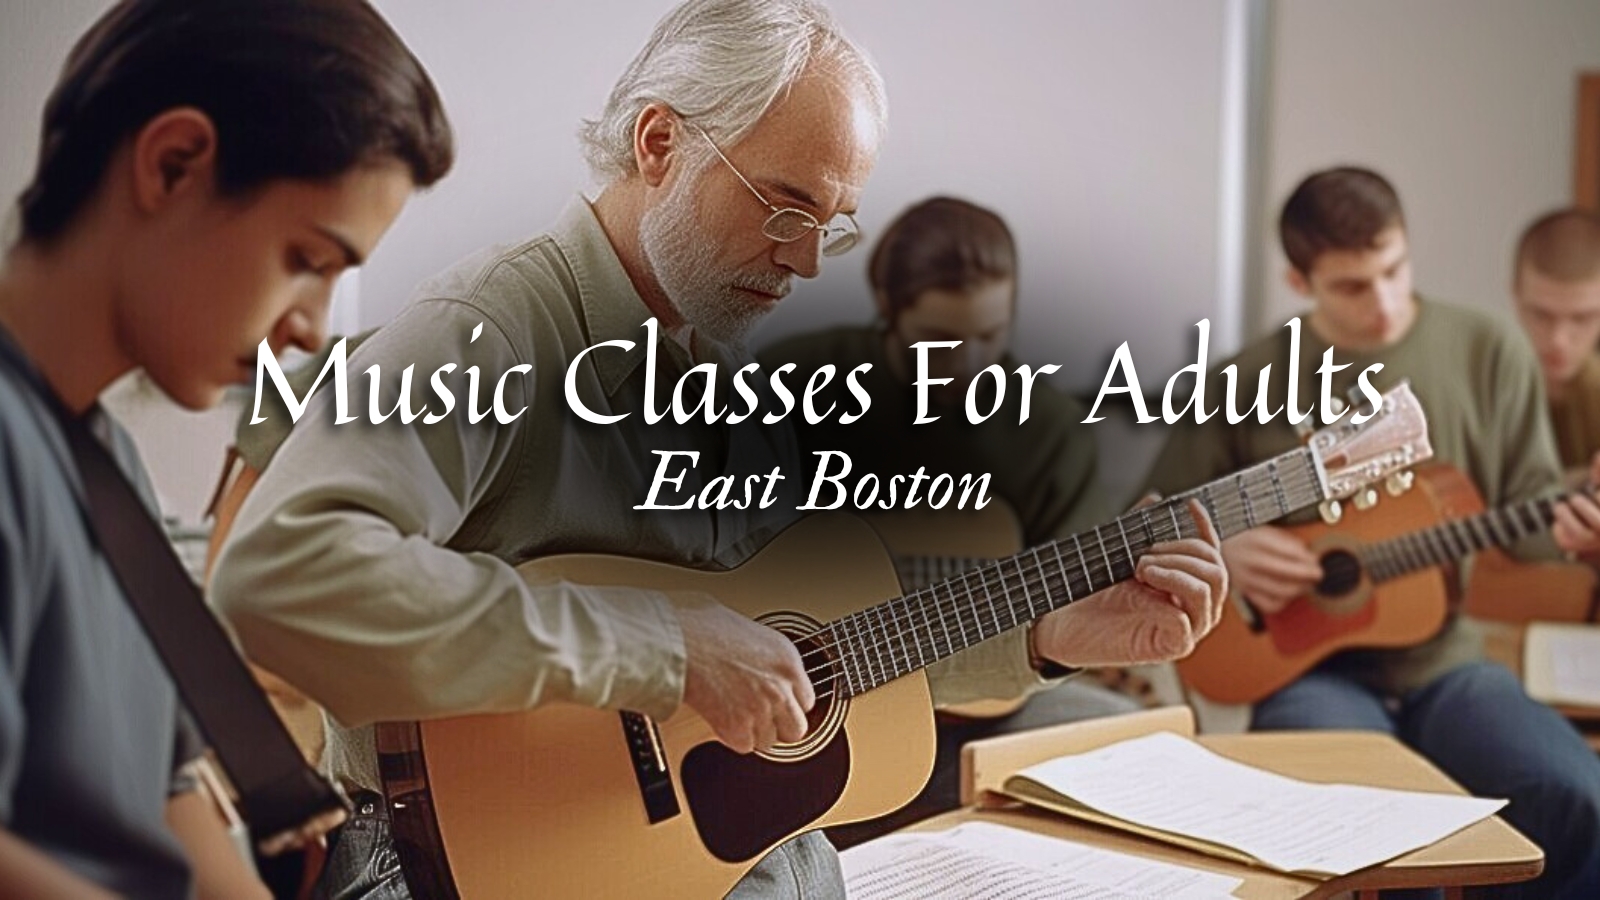 Music Classes for Adults in East Boston, Massachusetts: Unlock Your Musical Potential at Musicians Playground